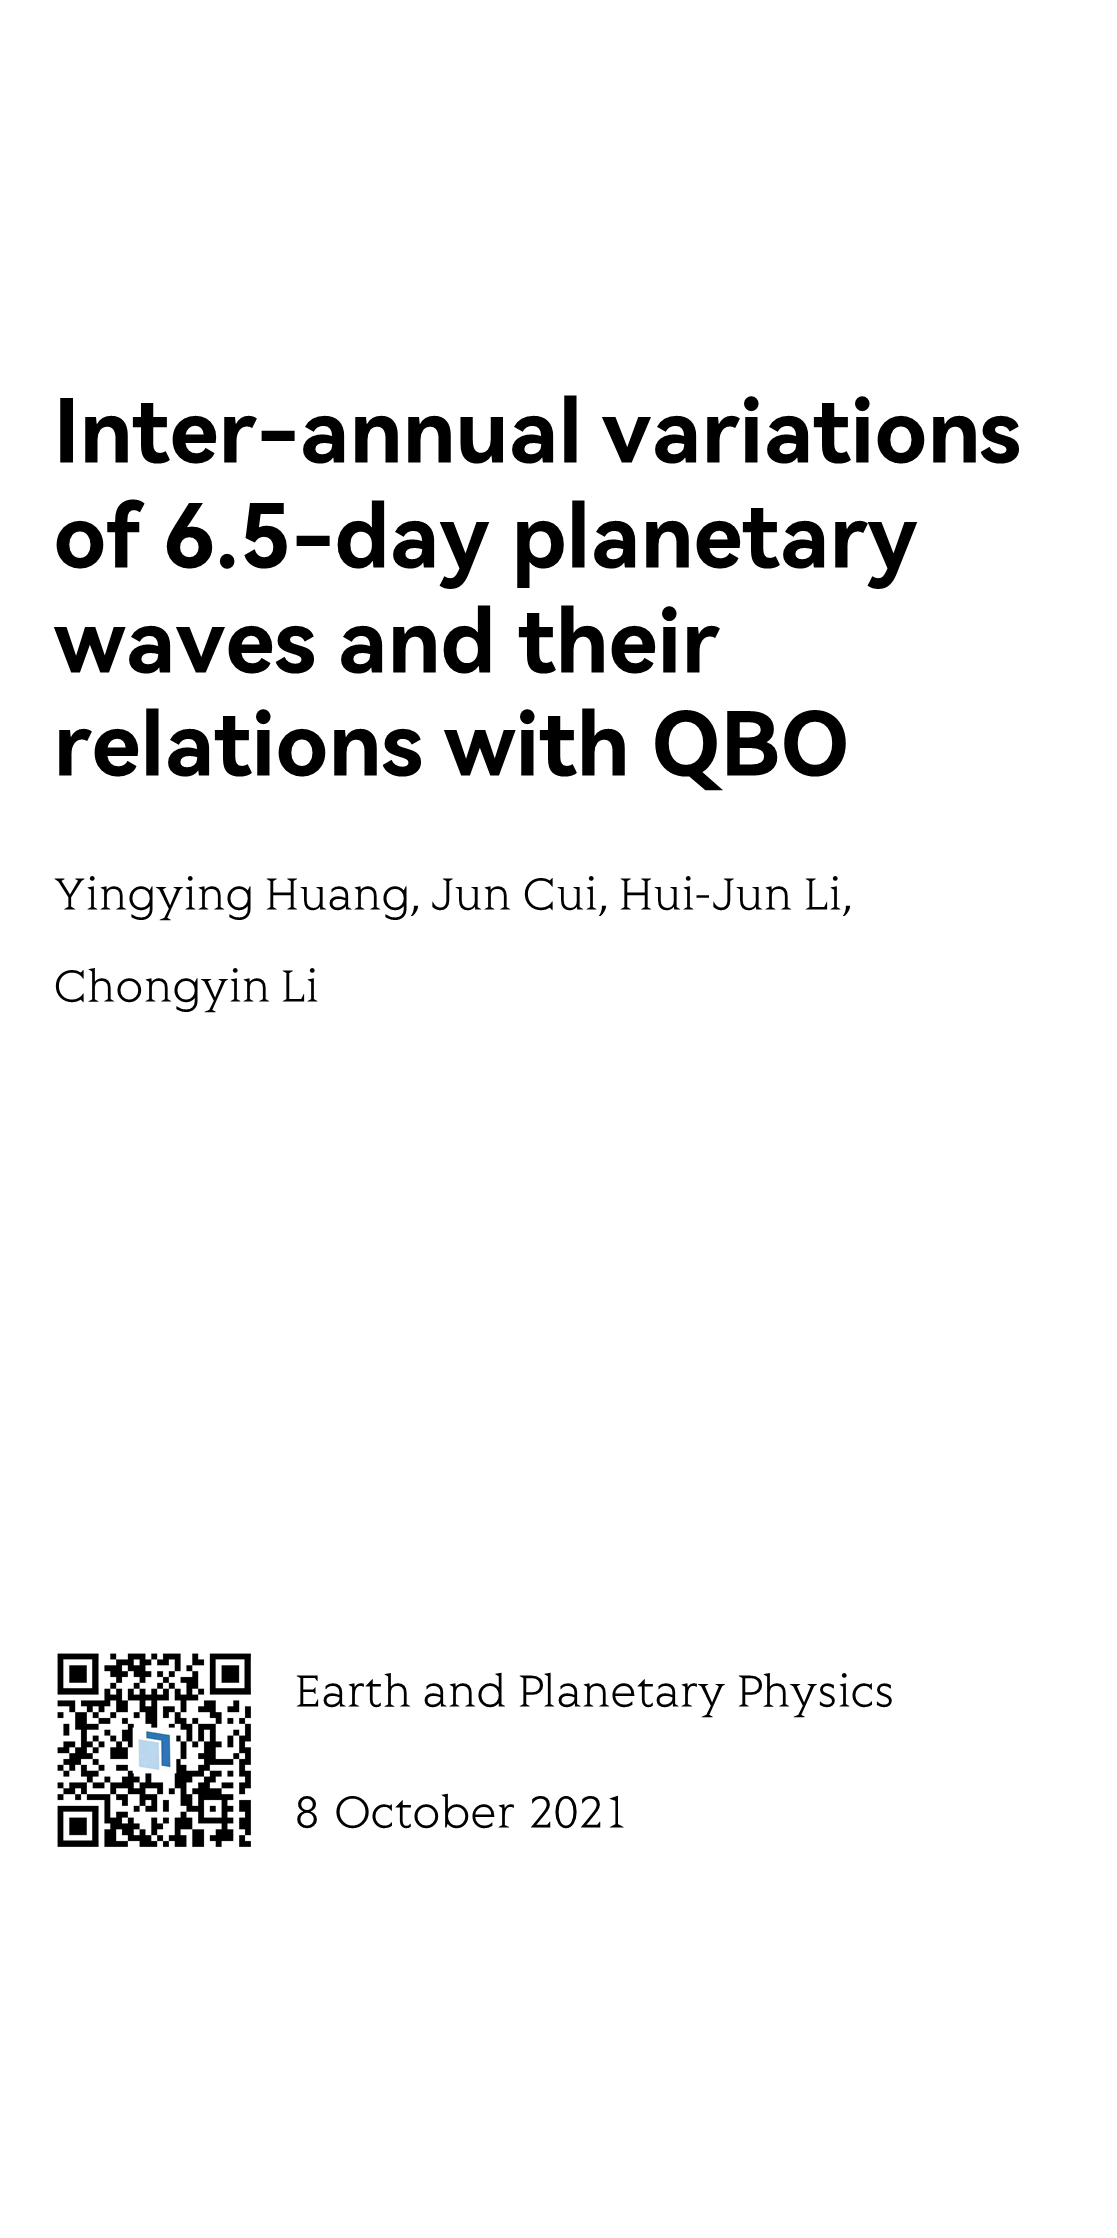 Inter-annual variations of 6.5-day planetary waves and their relations with QBO_1